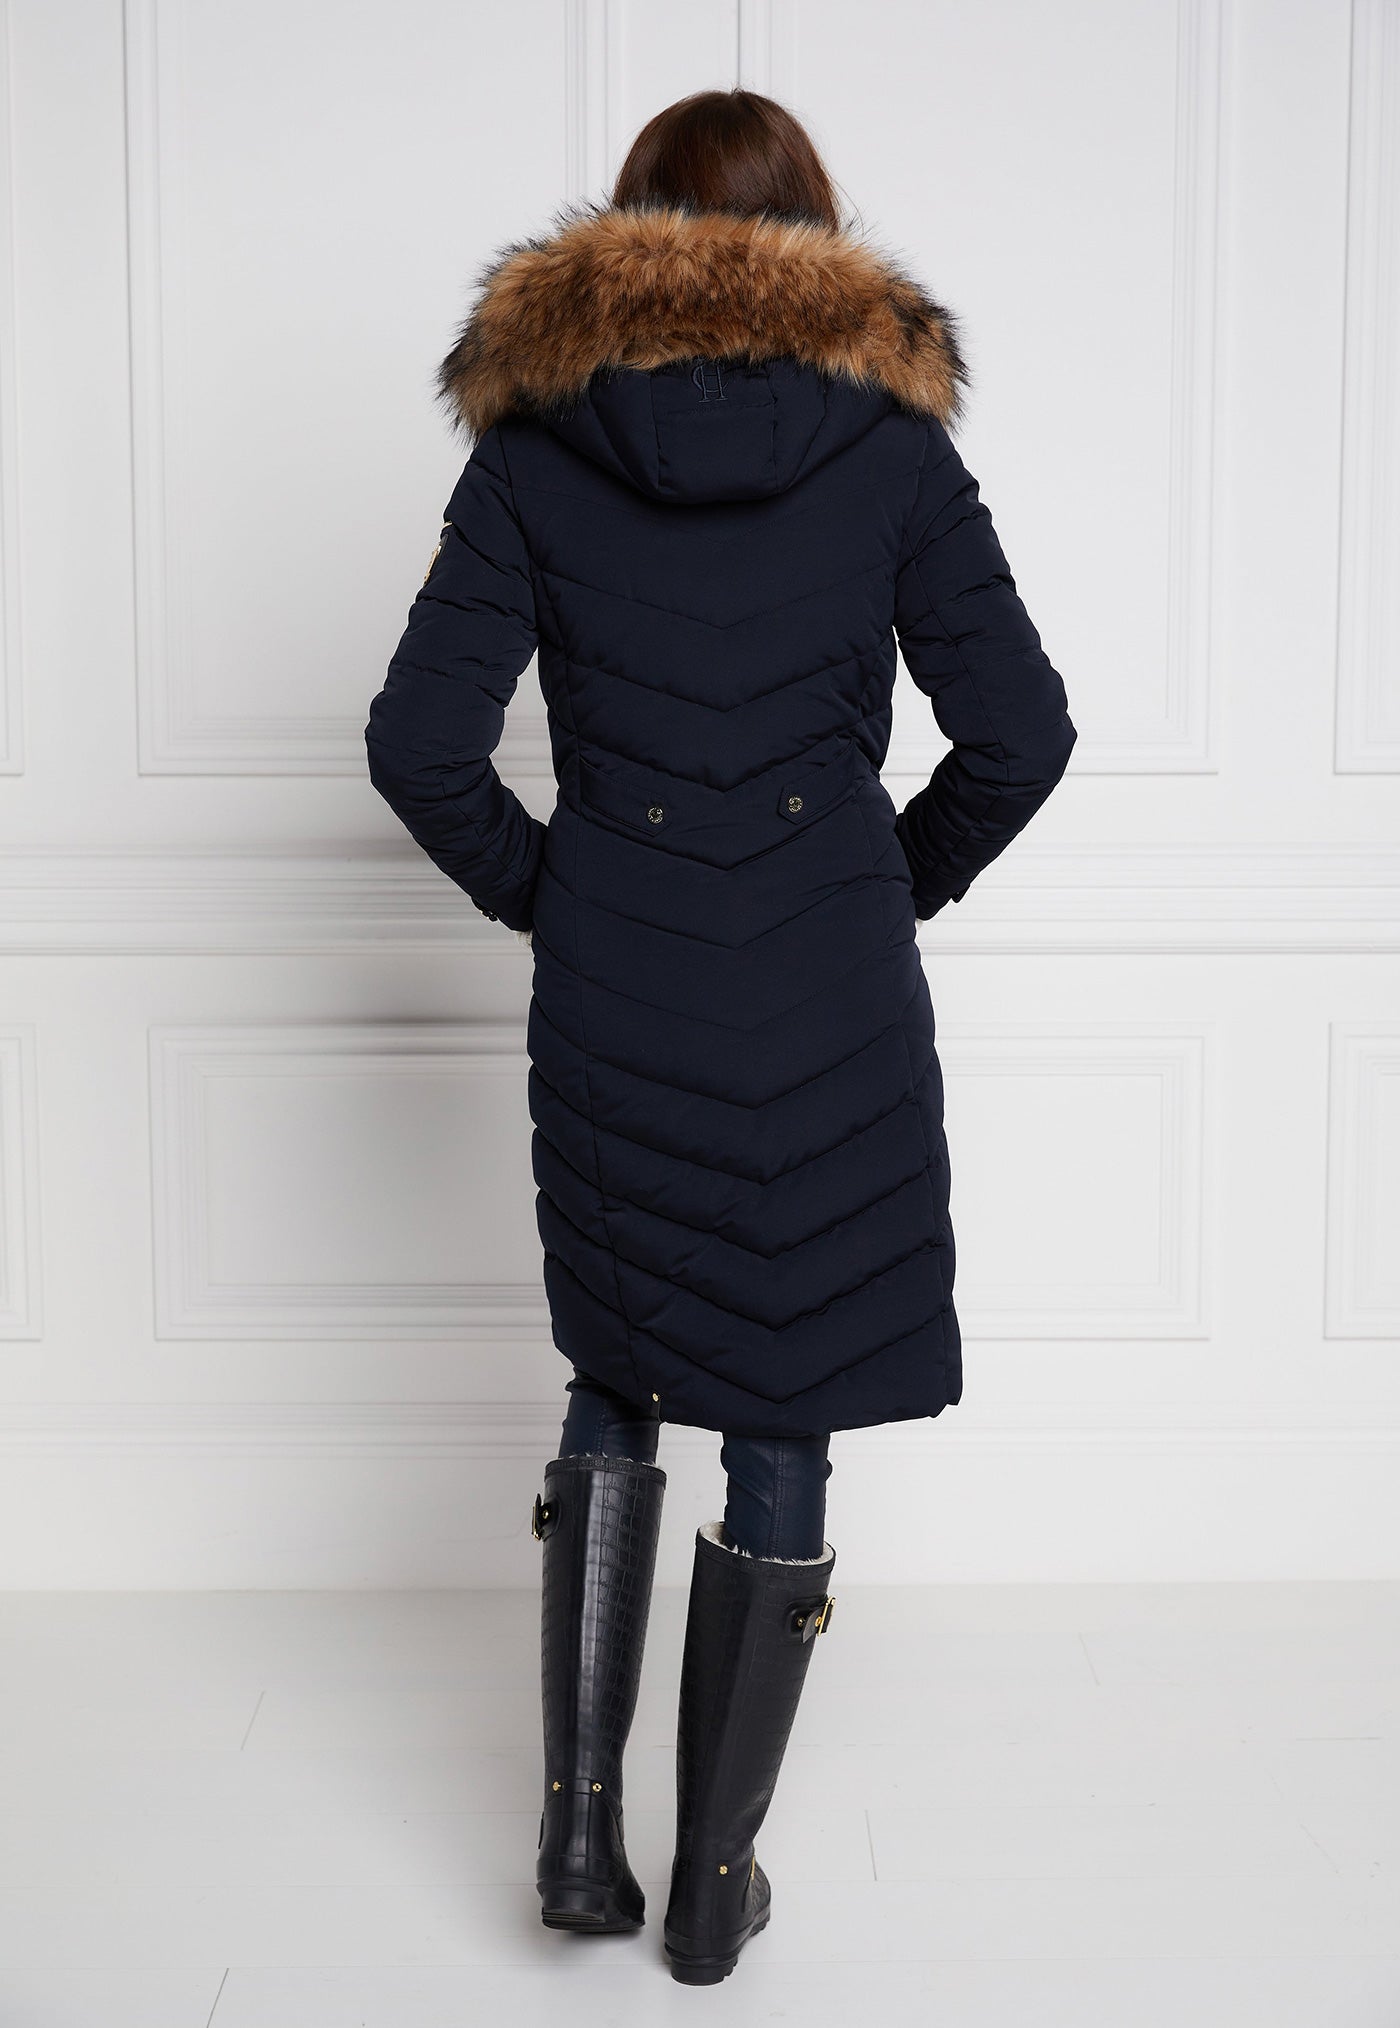 The Wellington Coat - Ink Navy sold by Angel Divine